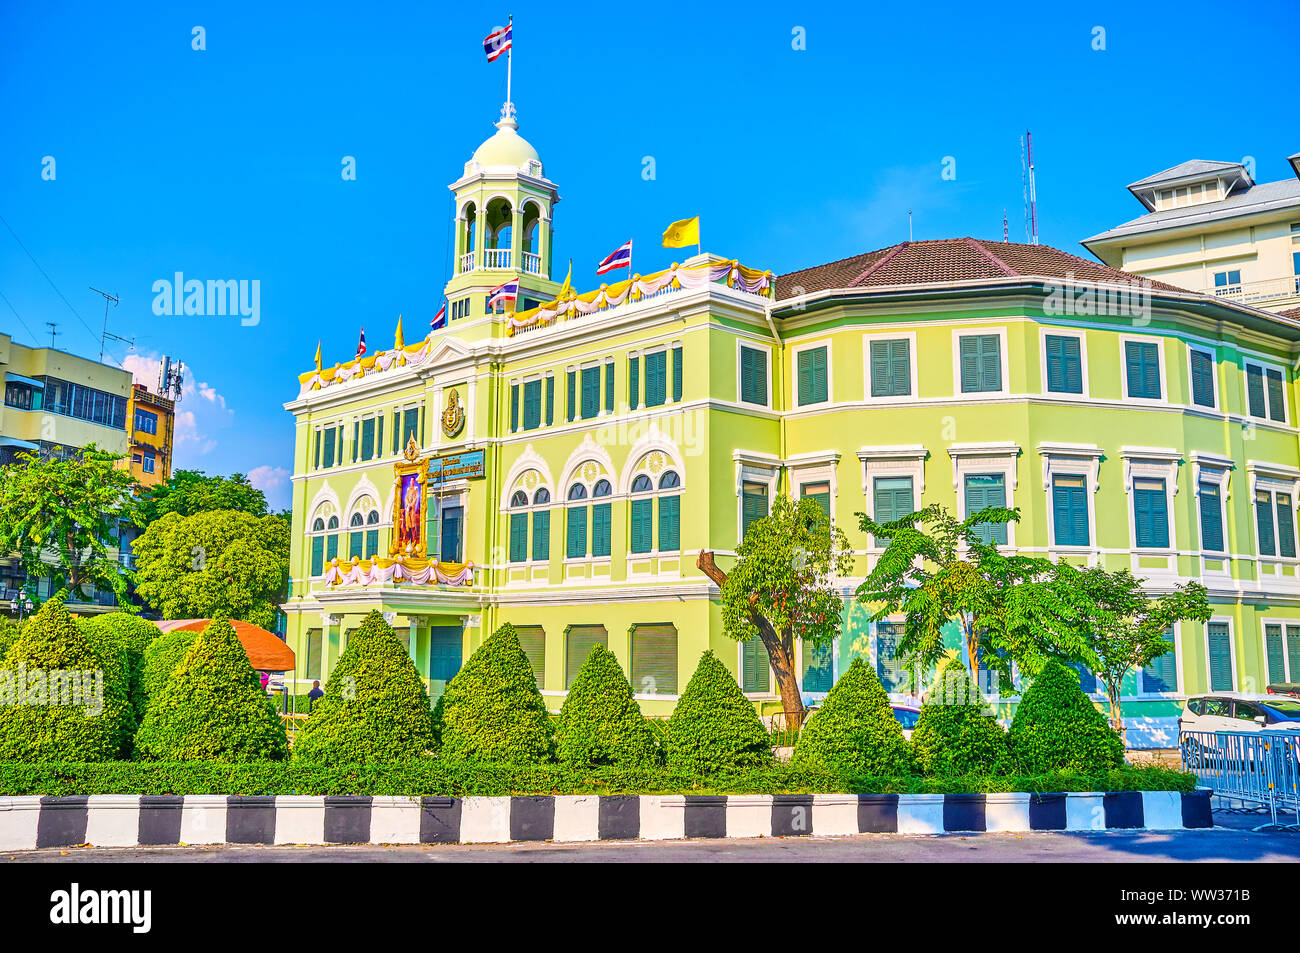 BANGKOK, THAILAND - APRIL 24, 2019: The beautiful edifice is a historical department store in Dusit district, nowadays serves as the King Prajadhipok Stock Photo